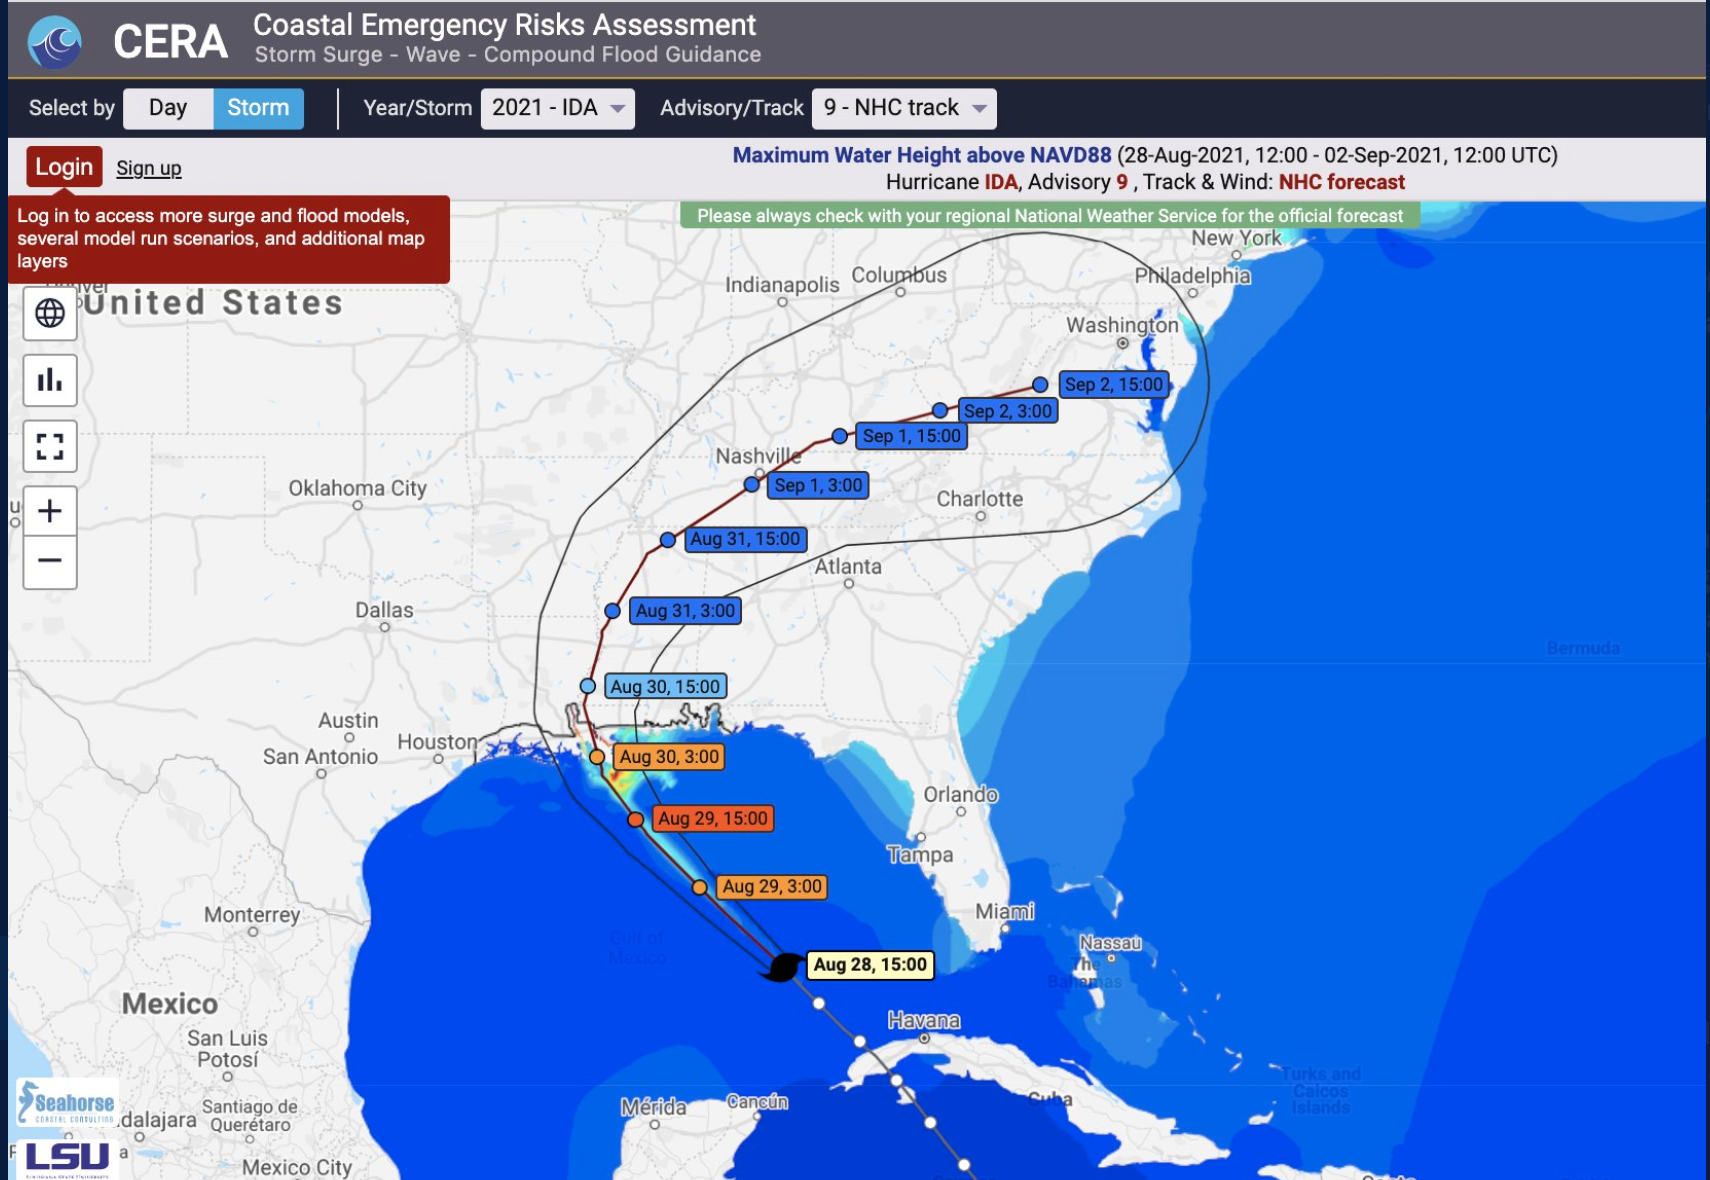 An image from storm surge models of Hurricane Ida developed using the ADCIRC Surge Guidance System (ASGS). Credit: Coastal Emergency Risks Assessment (CERA)